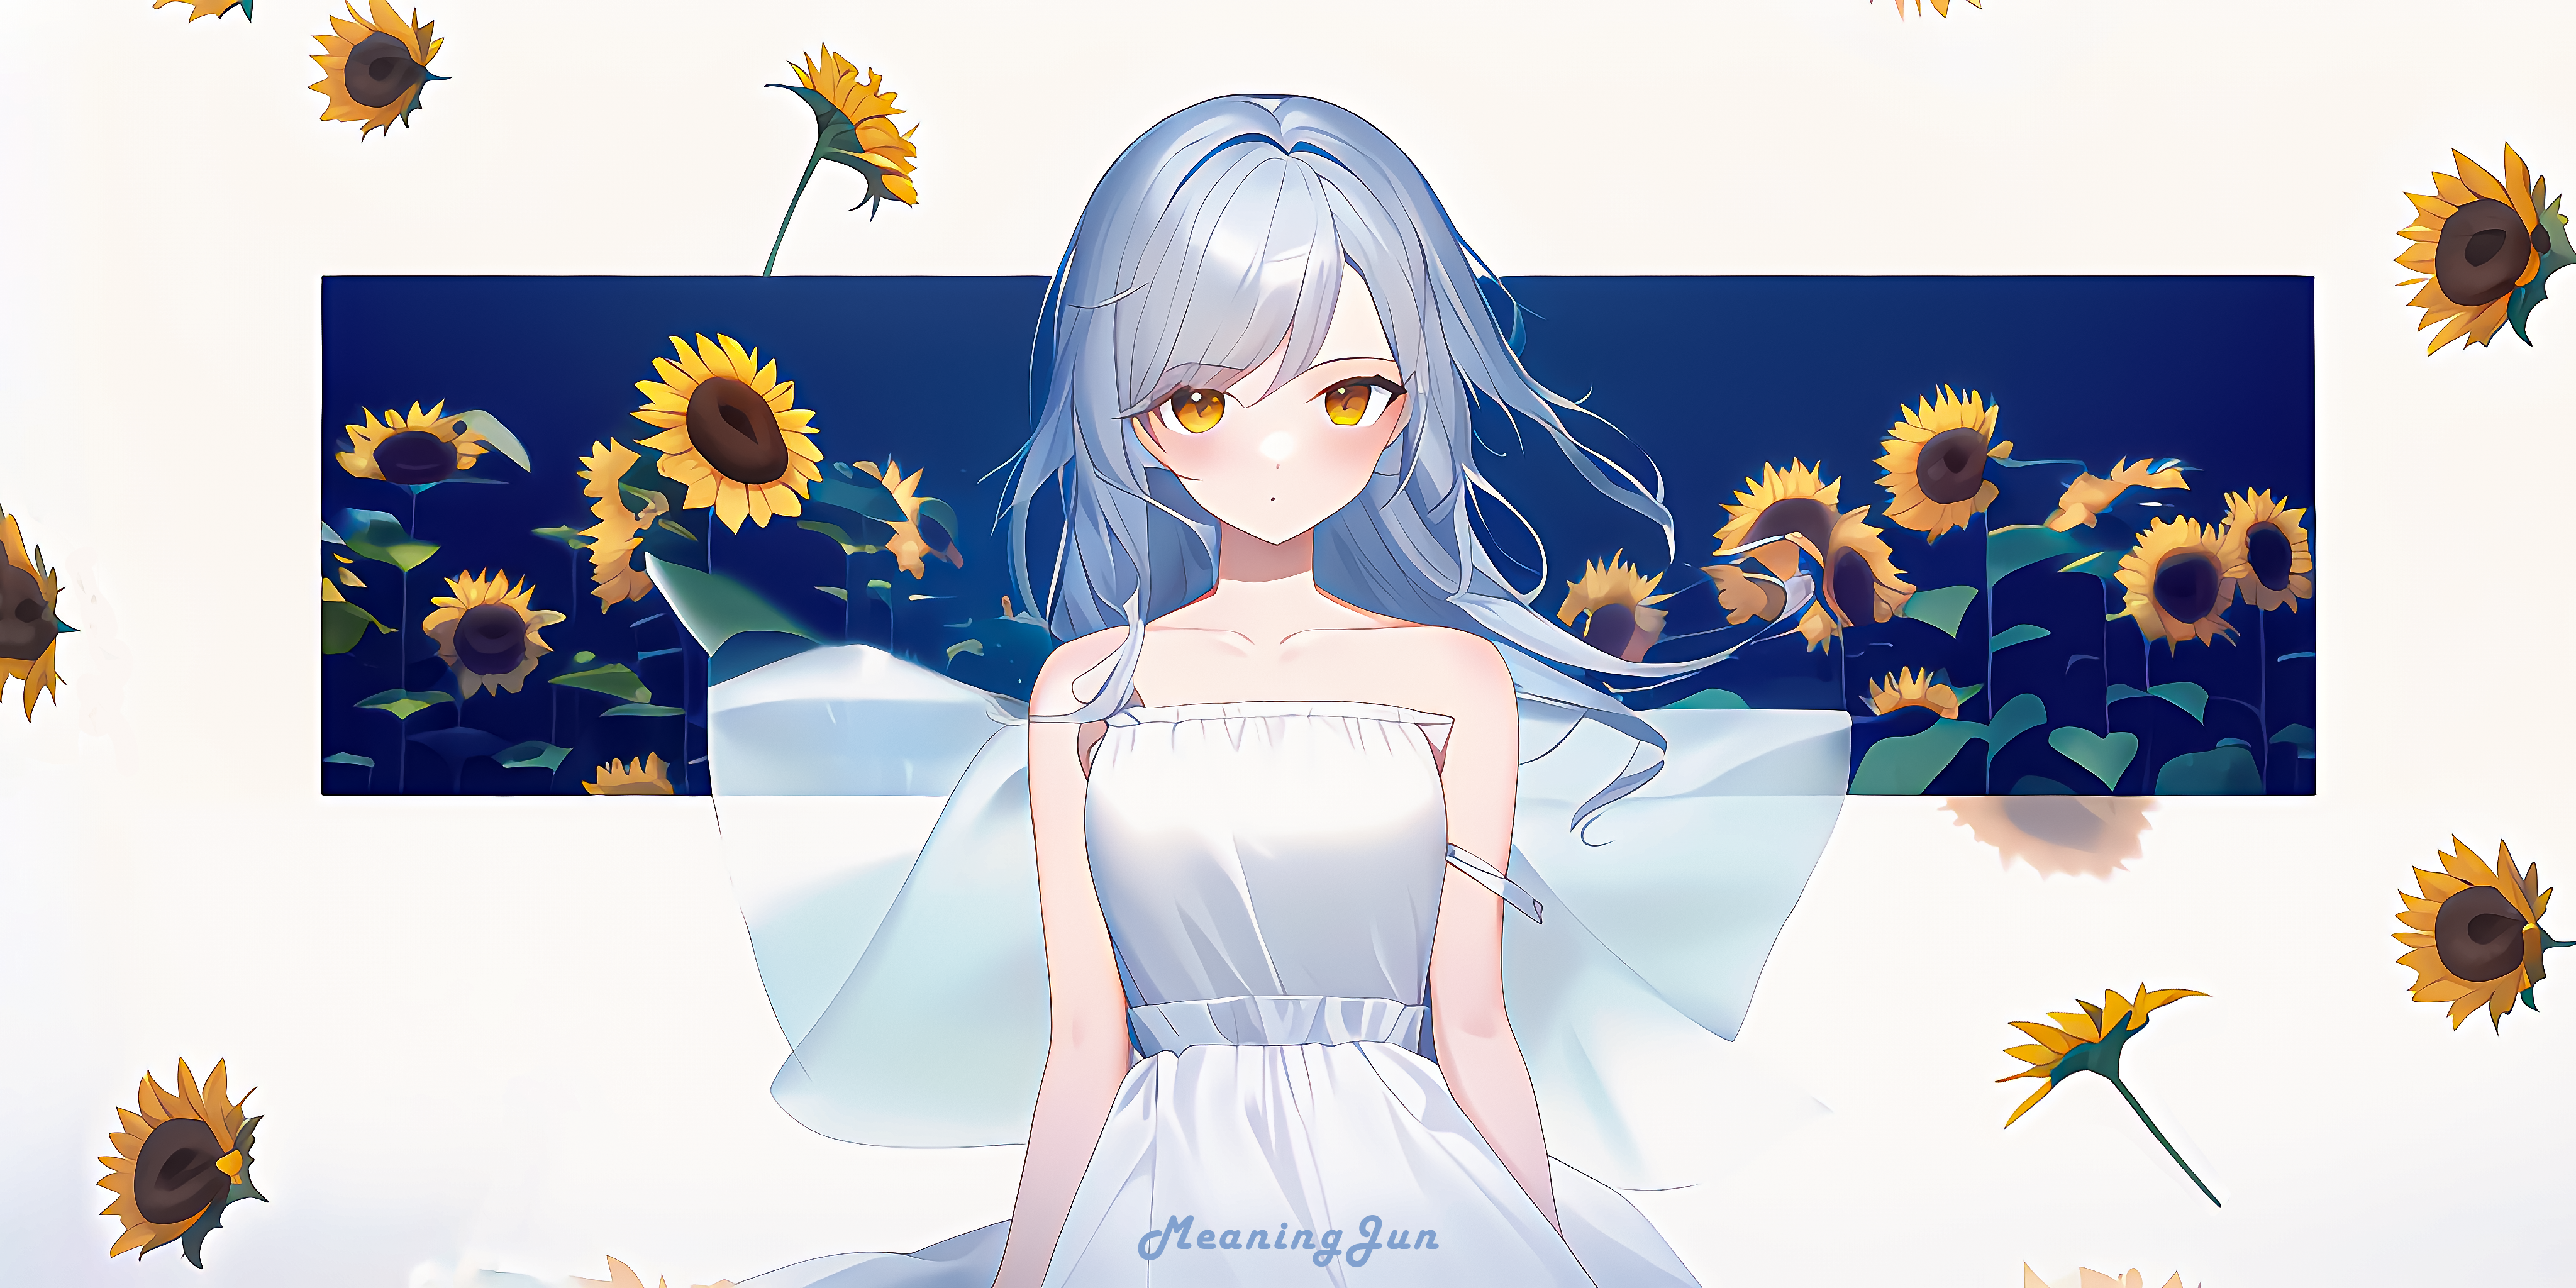 Anime 4096x2048 anime anime girls picture-in-picture AI art dress dandelion